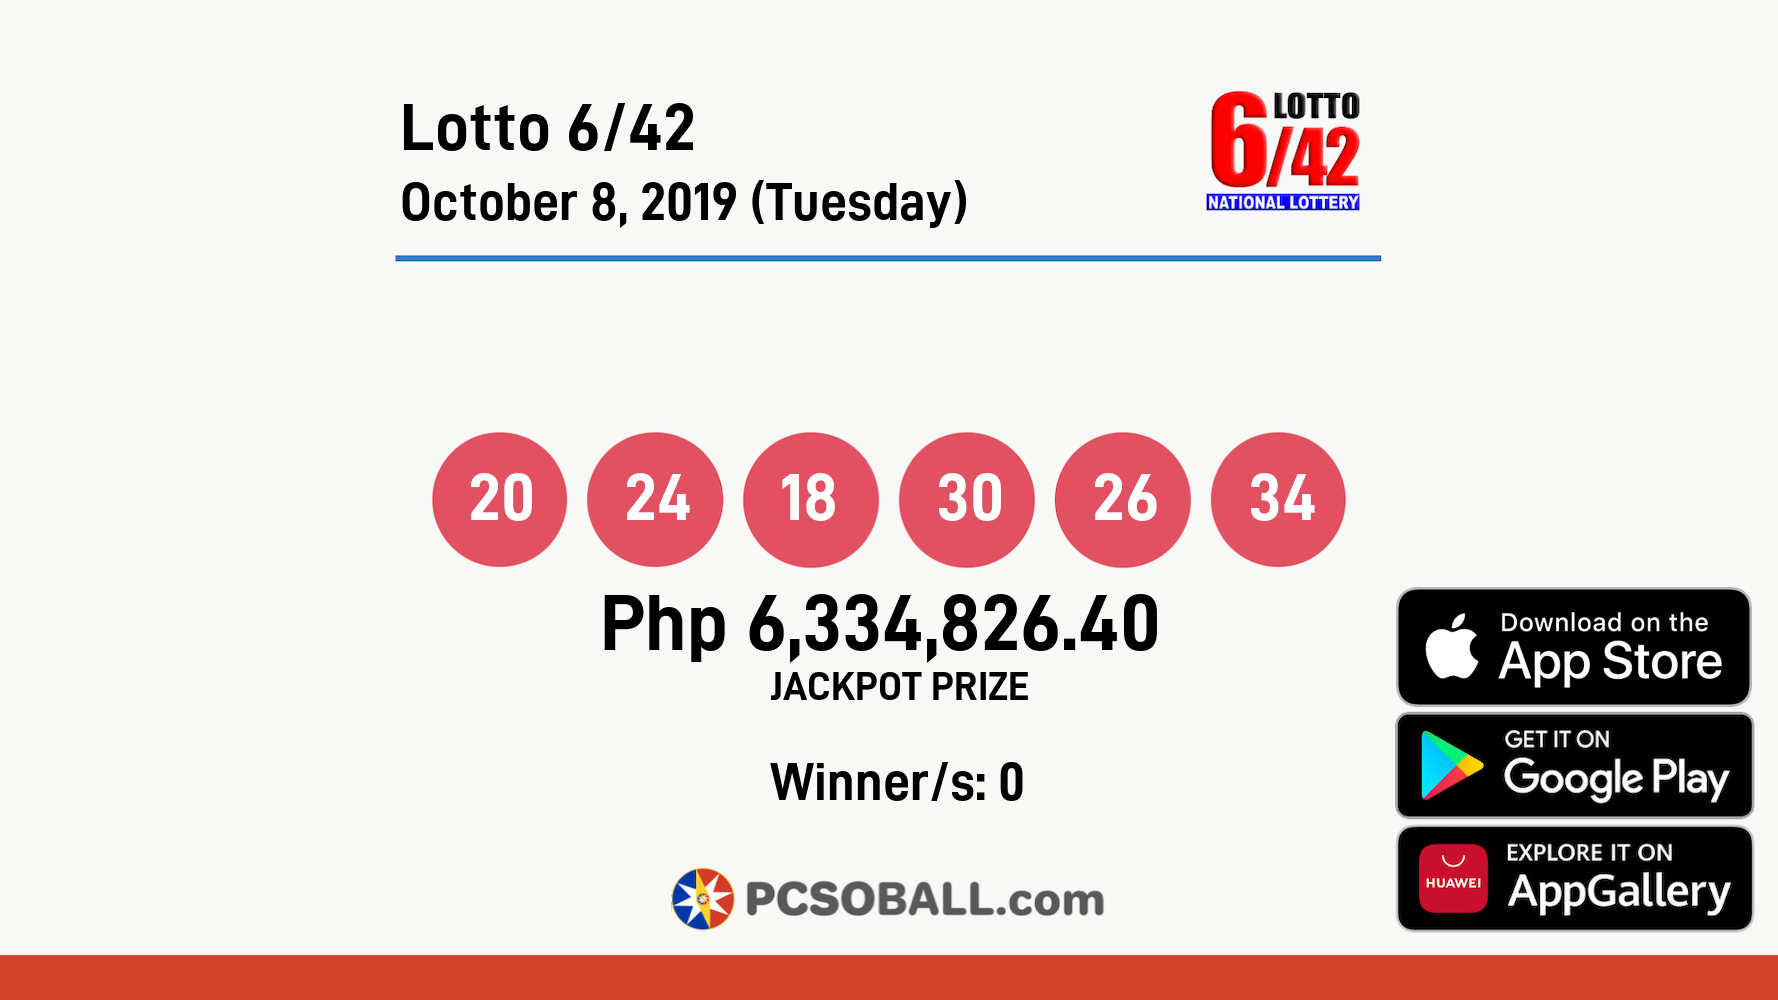 Lotto 6/42 October 8, 2019 (Tuesday) Result